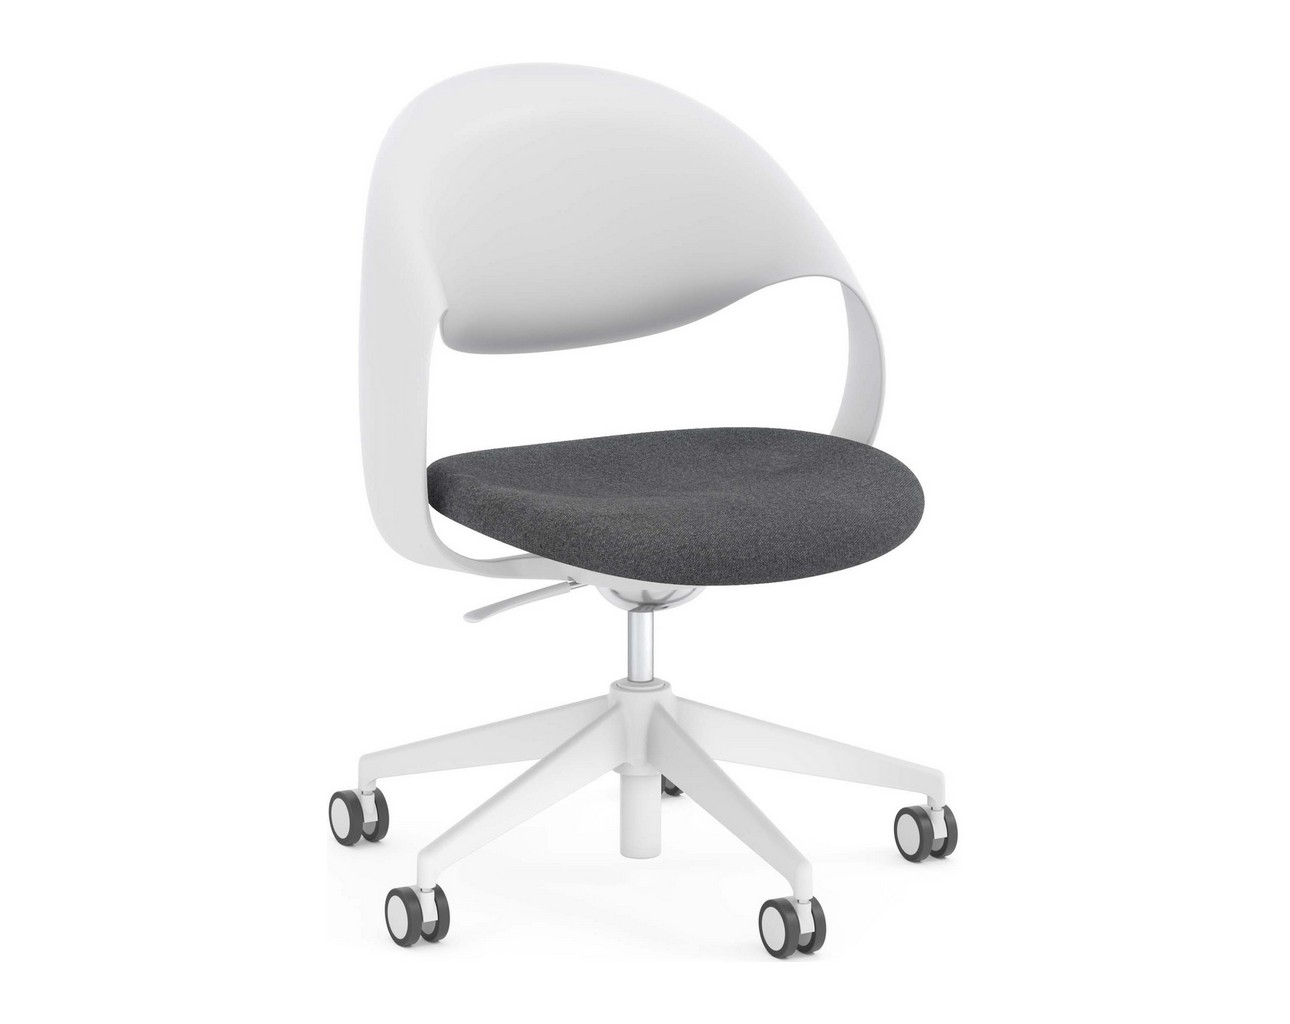 Loop Multi-Purpose Chair – White Frame with Grey Seat